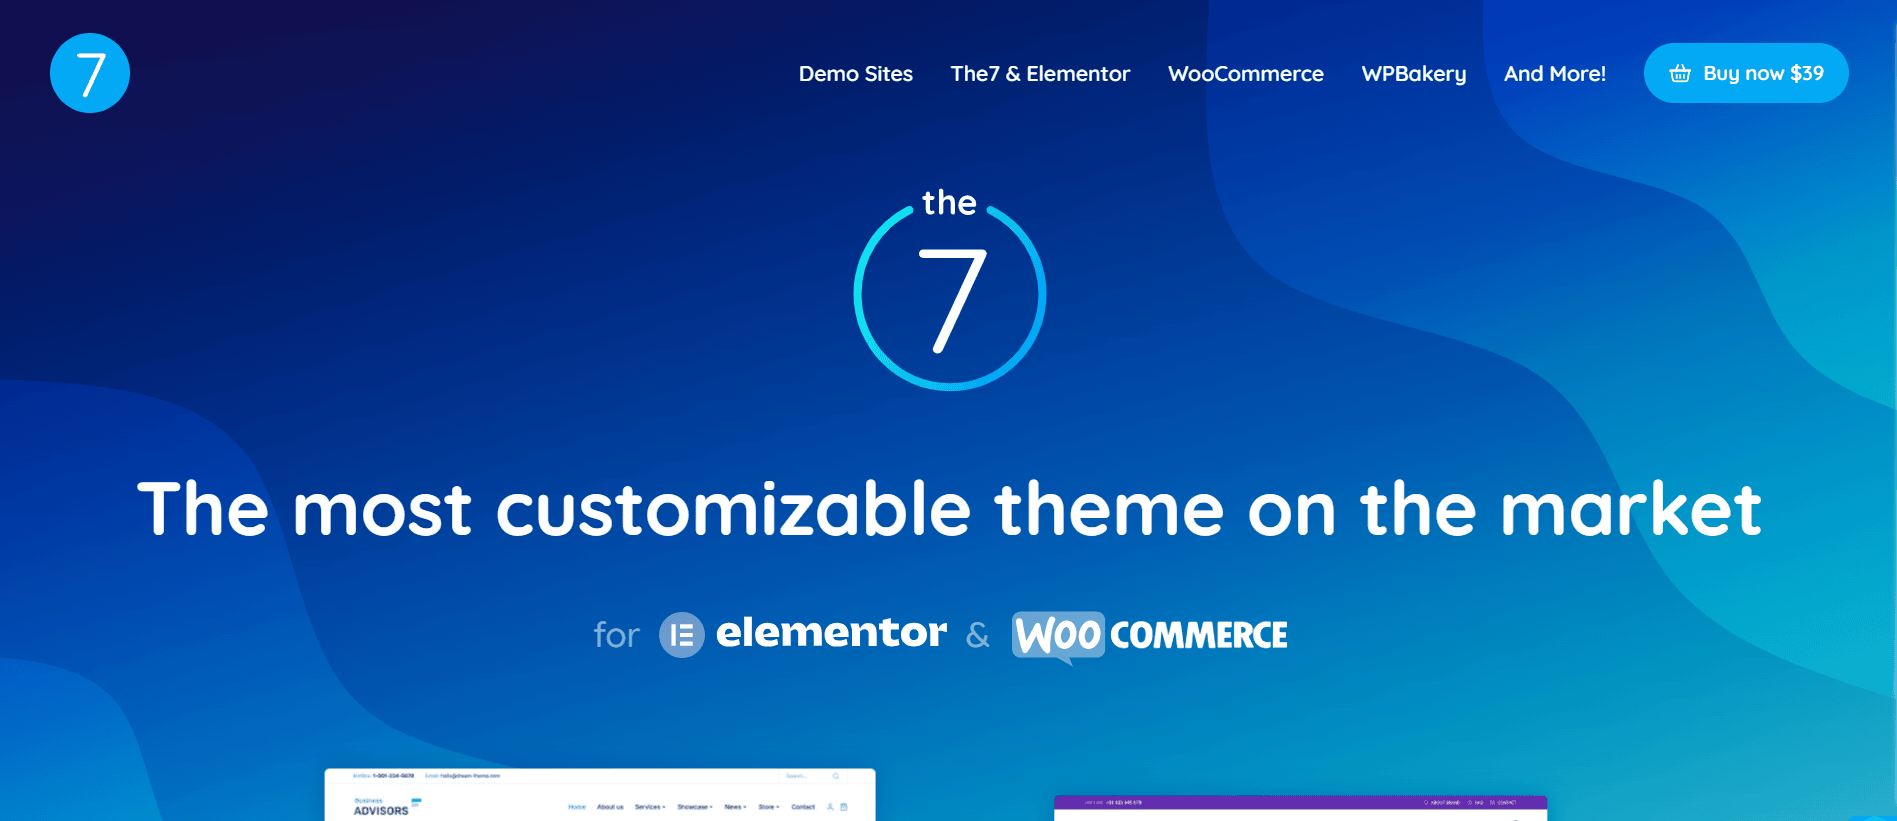 Homepage banner of 'The7' theme advertising as the most customizable on the market for Elementor and WooCommerce with a blue color scheme.